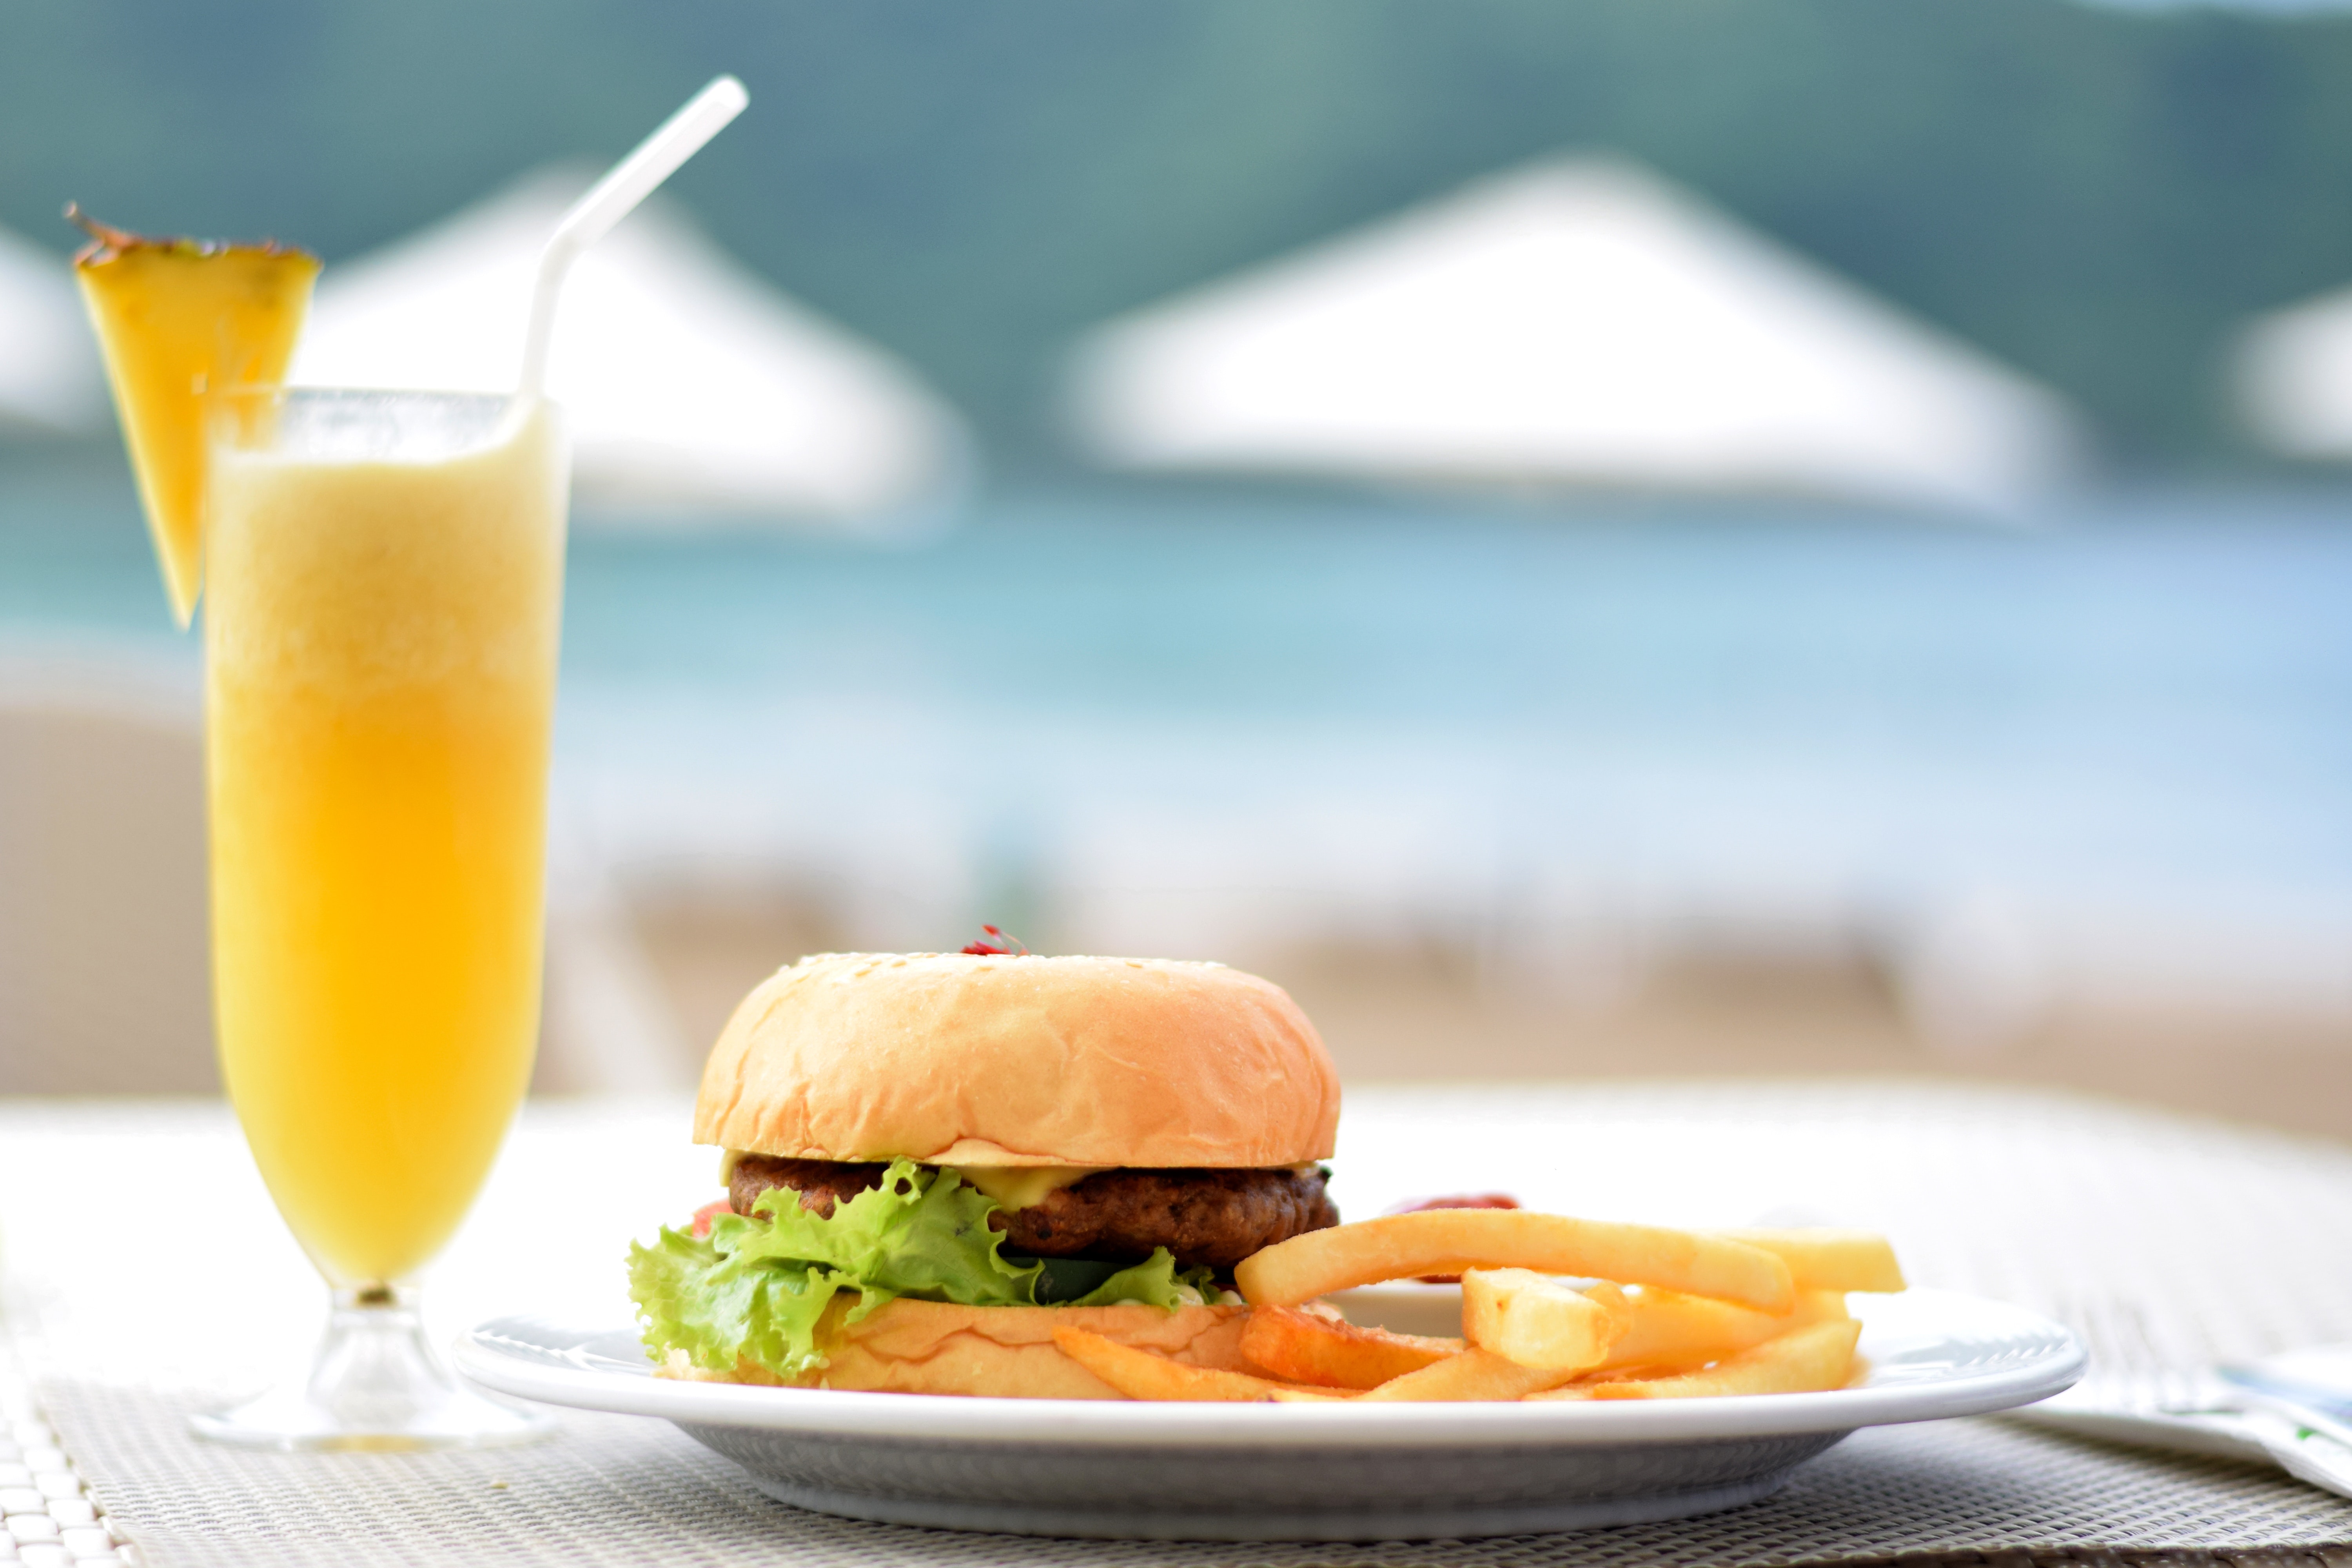 Burger with lettuce and fries on plate beside pineapple juice photo